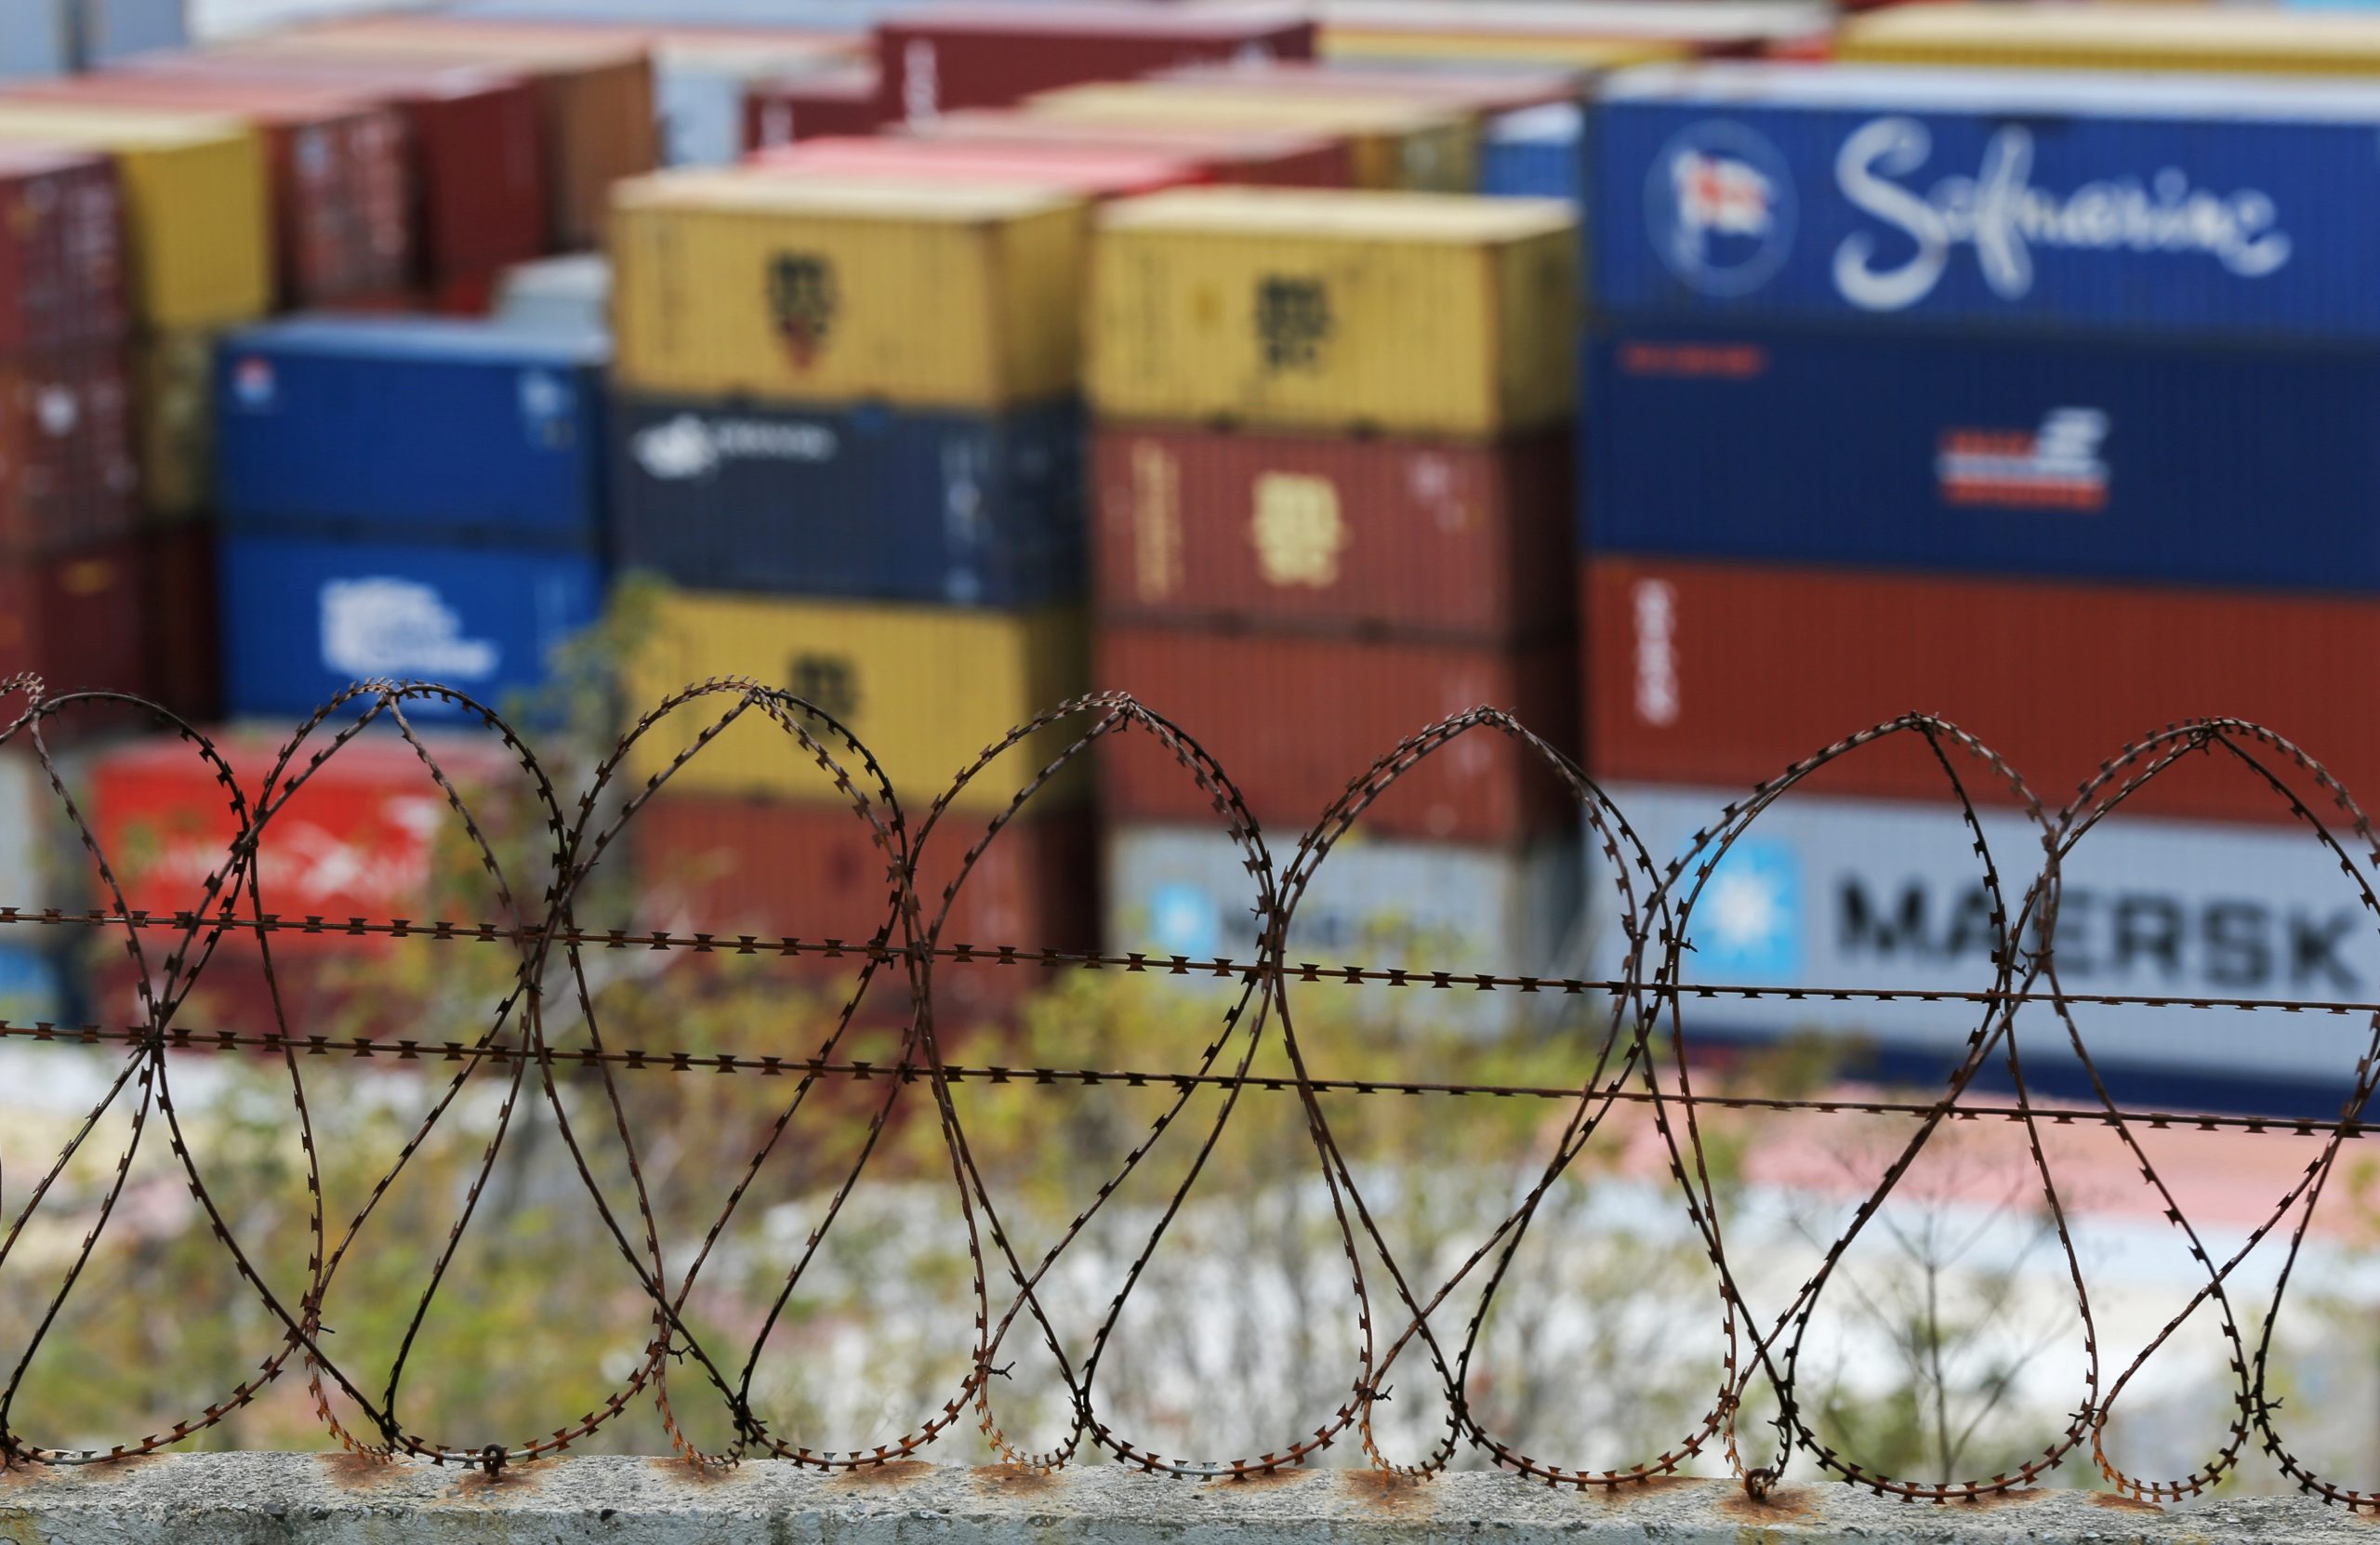 Photo: Stacked shipping containers are seen behind barbed wire at a commercial port in Vladivostok, Russia October 18, 2021. Picture taken October 18, 2021. Credit: REUTERS/Tatiana Meel